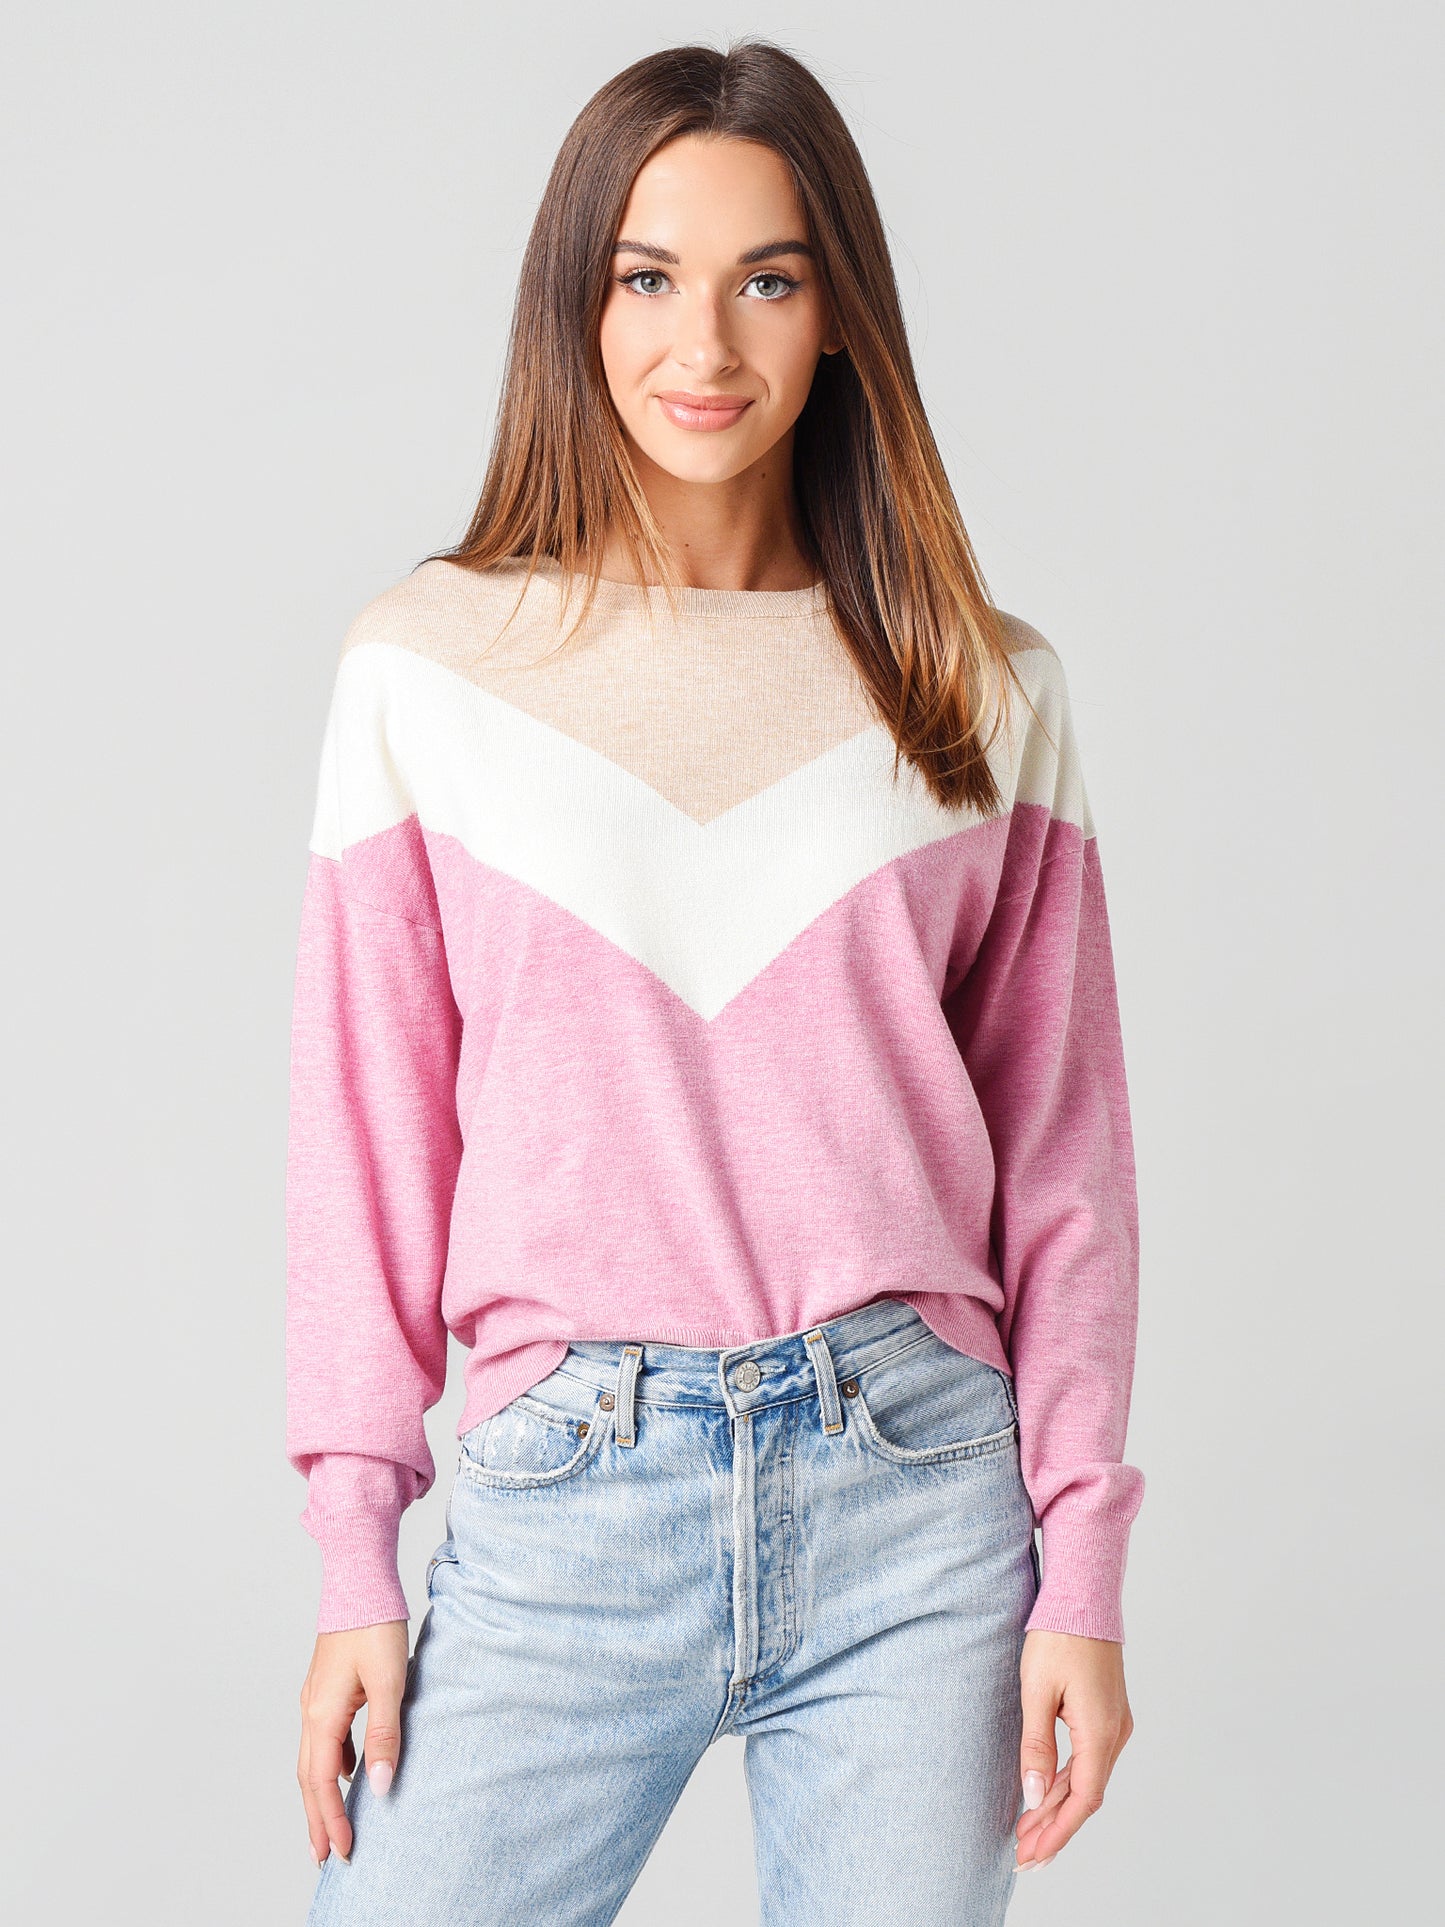 Cupcakes And Cashmere Women's Sabine Sweater